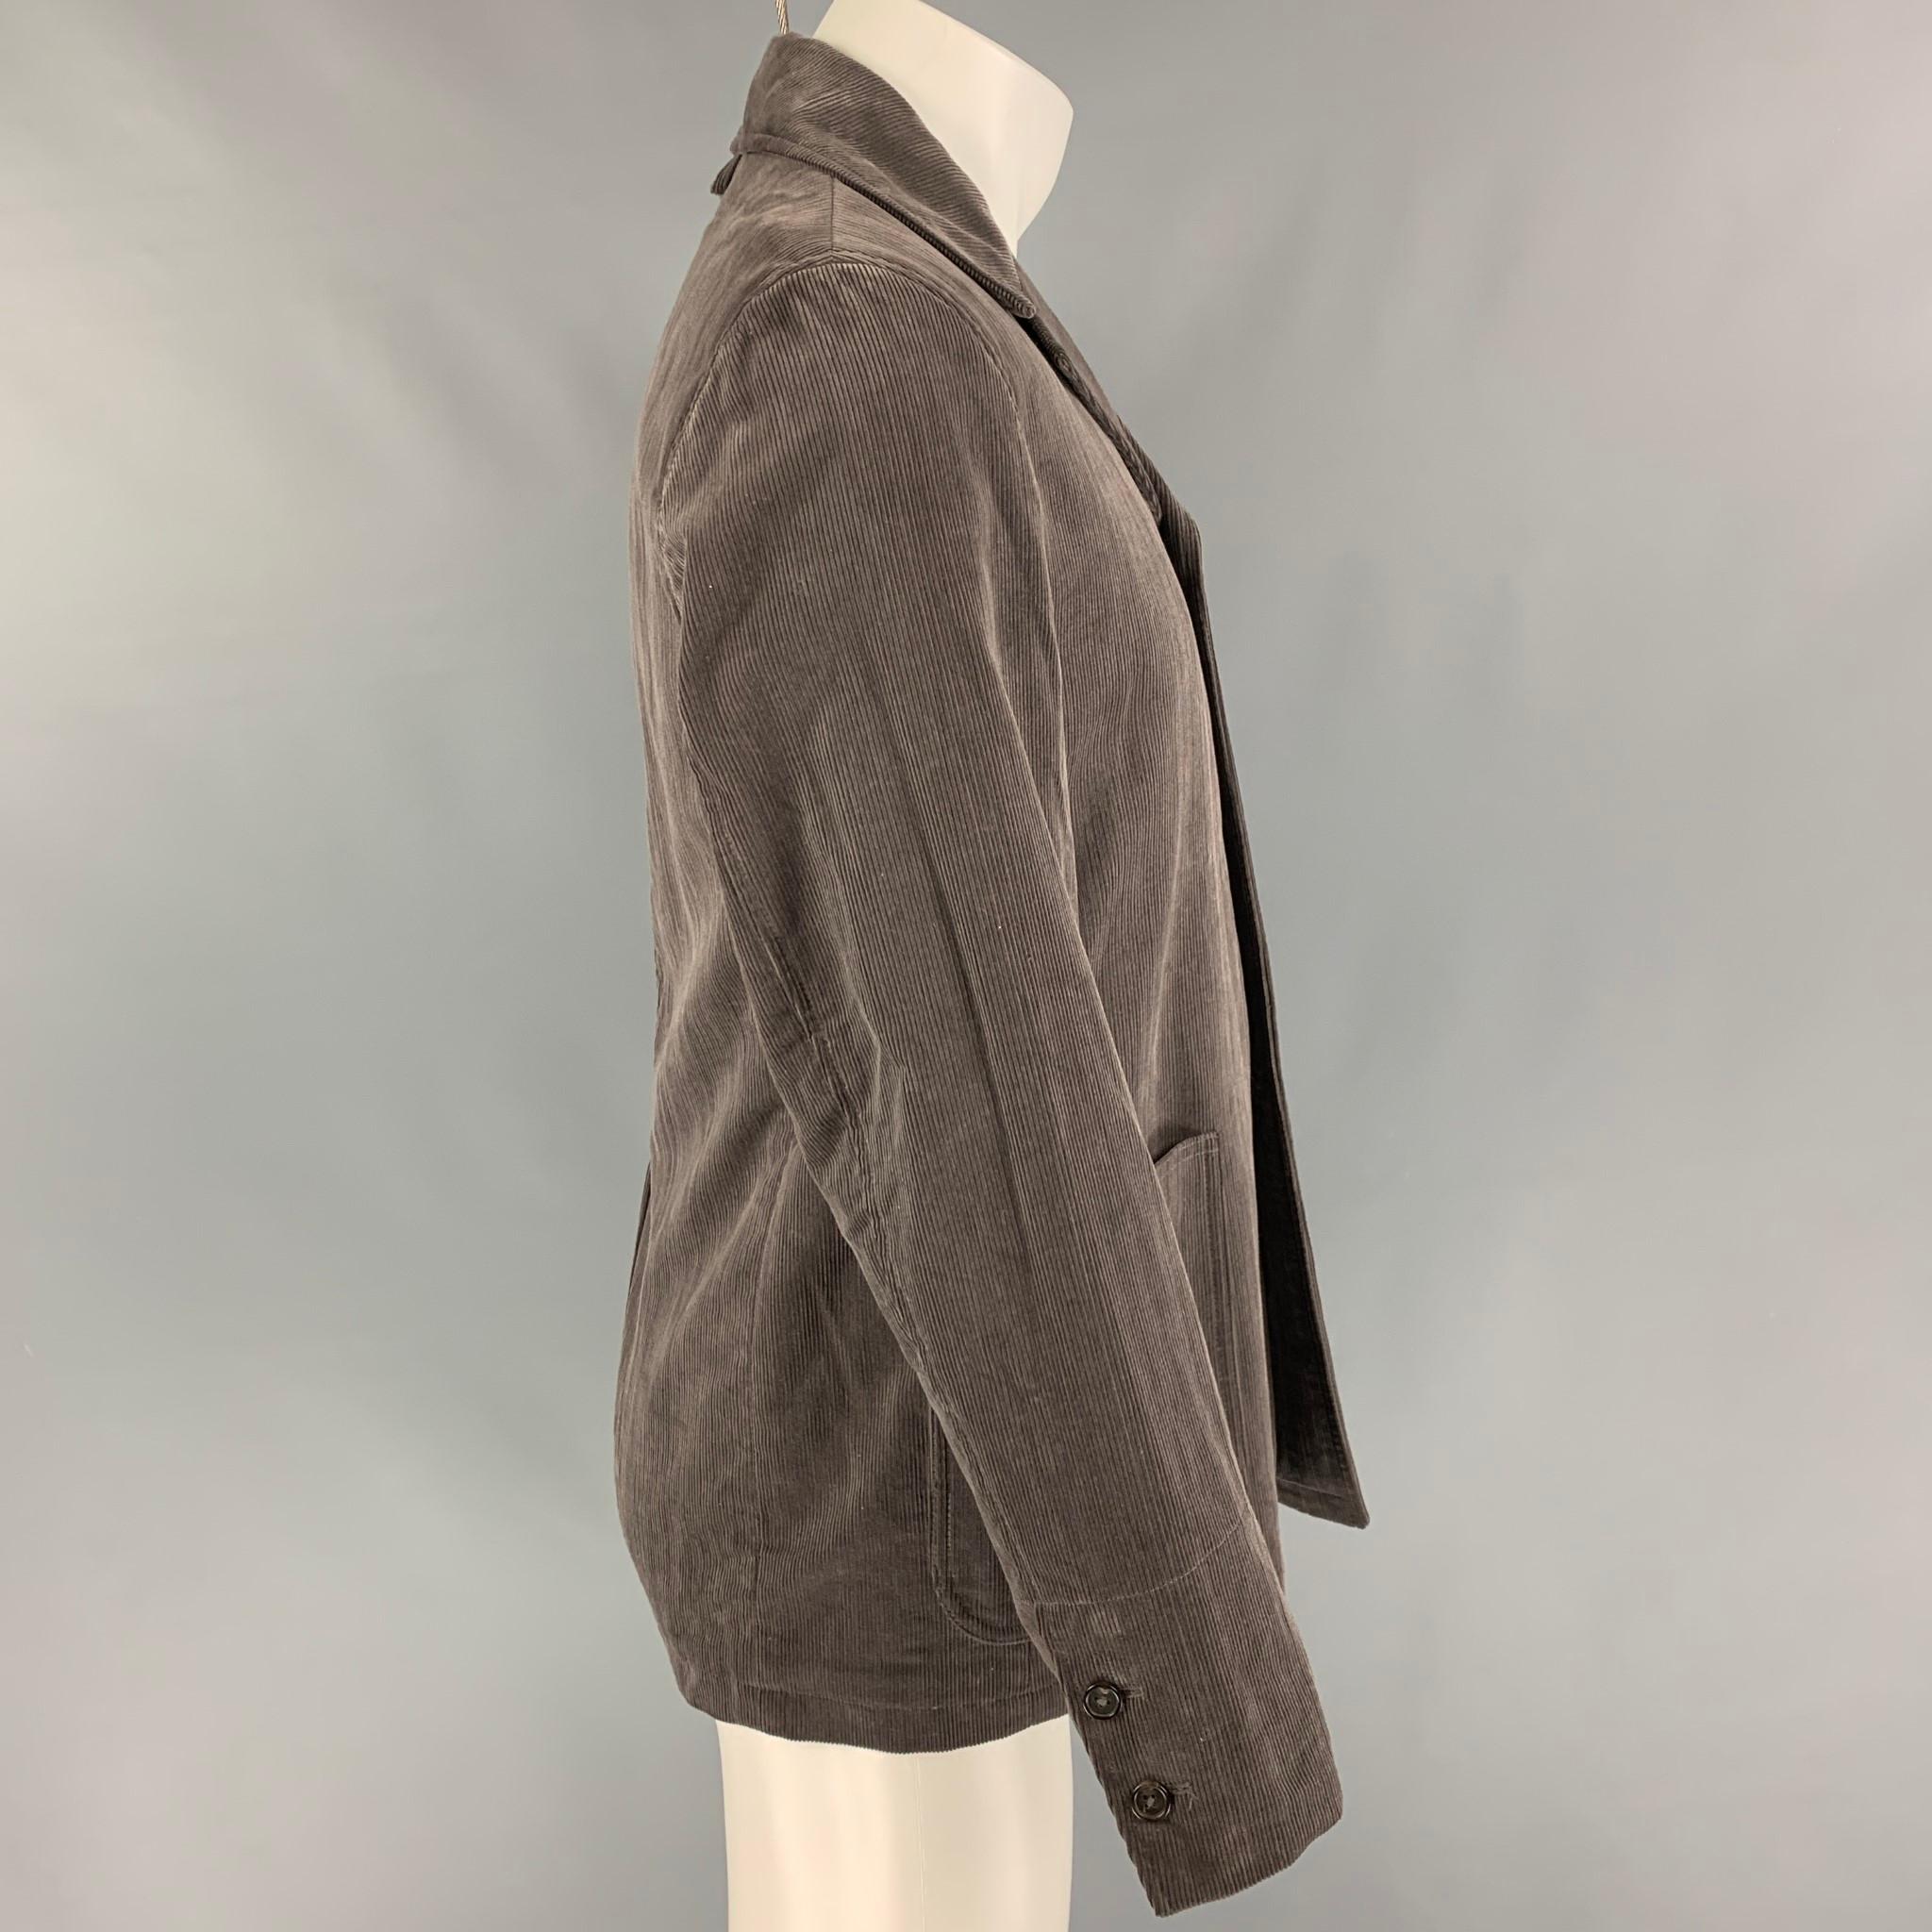 BLACK FLEECE jacket comes in a gray corduroy featuring patch pockets, spread collar, single back vent, and a buttoned closure. 

New With Tags.
Marked: BB2

Measurements:

Shoulder: 17 in.
Chest: 41 in.
Sleeve: 25 in.
Length: 28.5 in. 